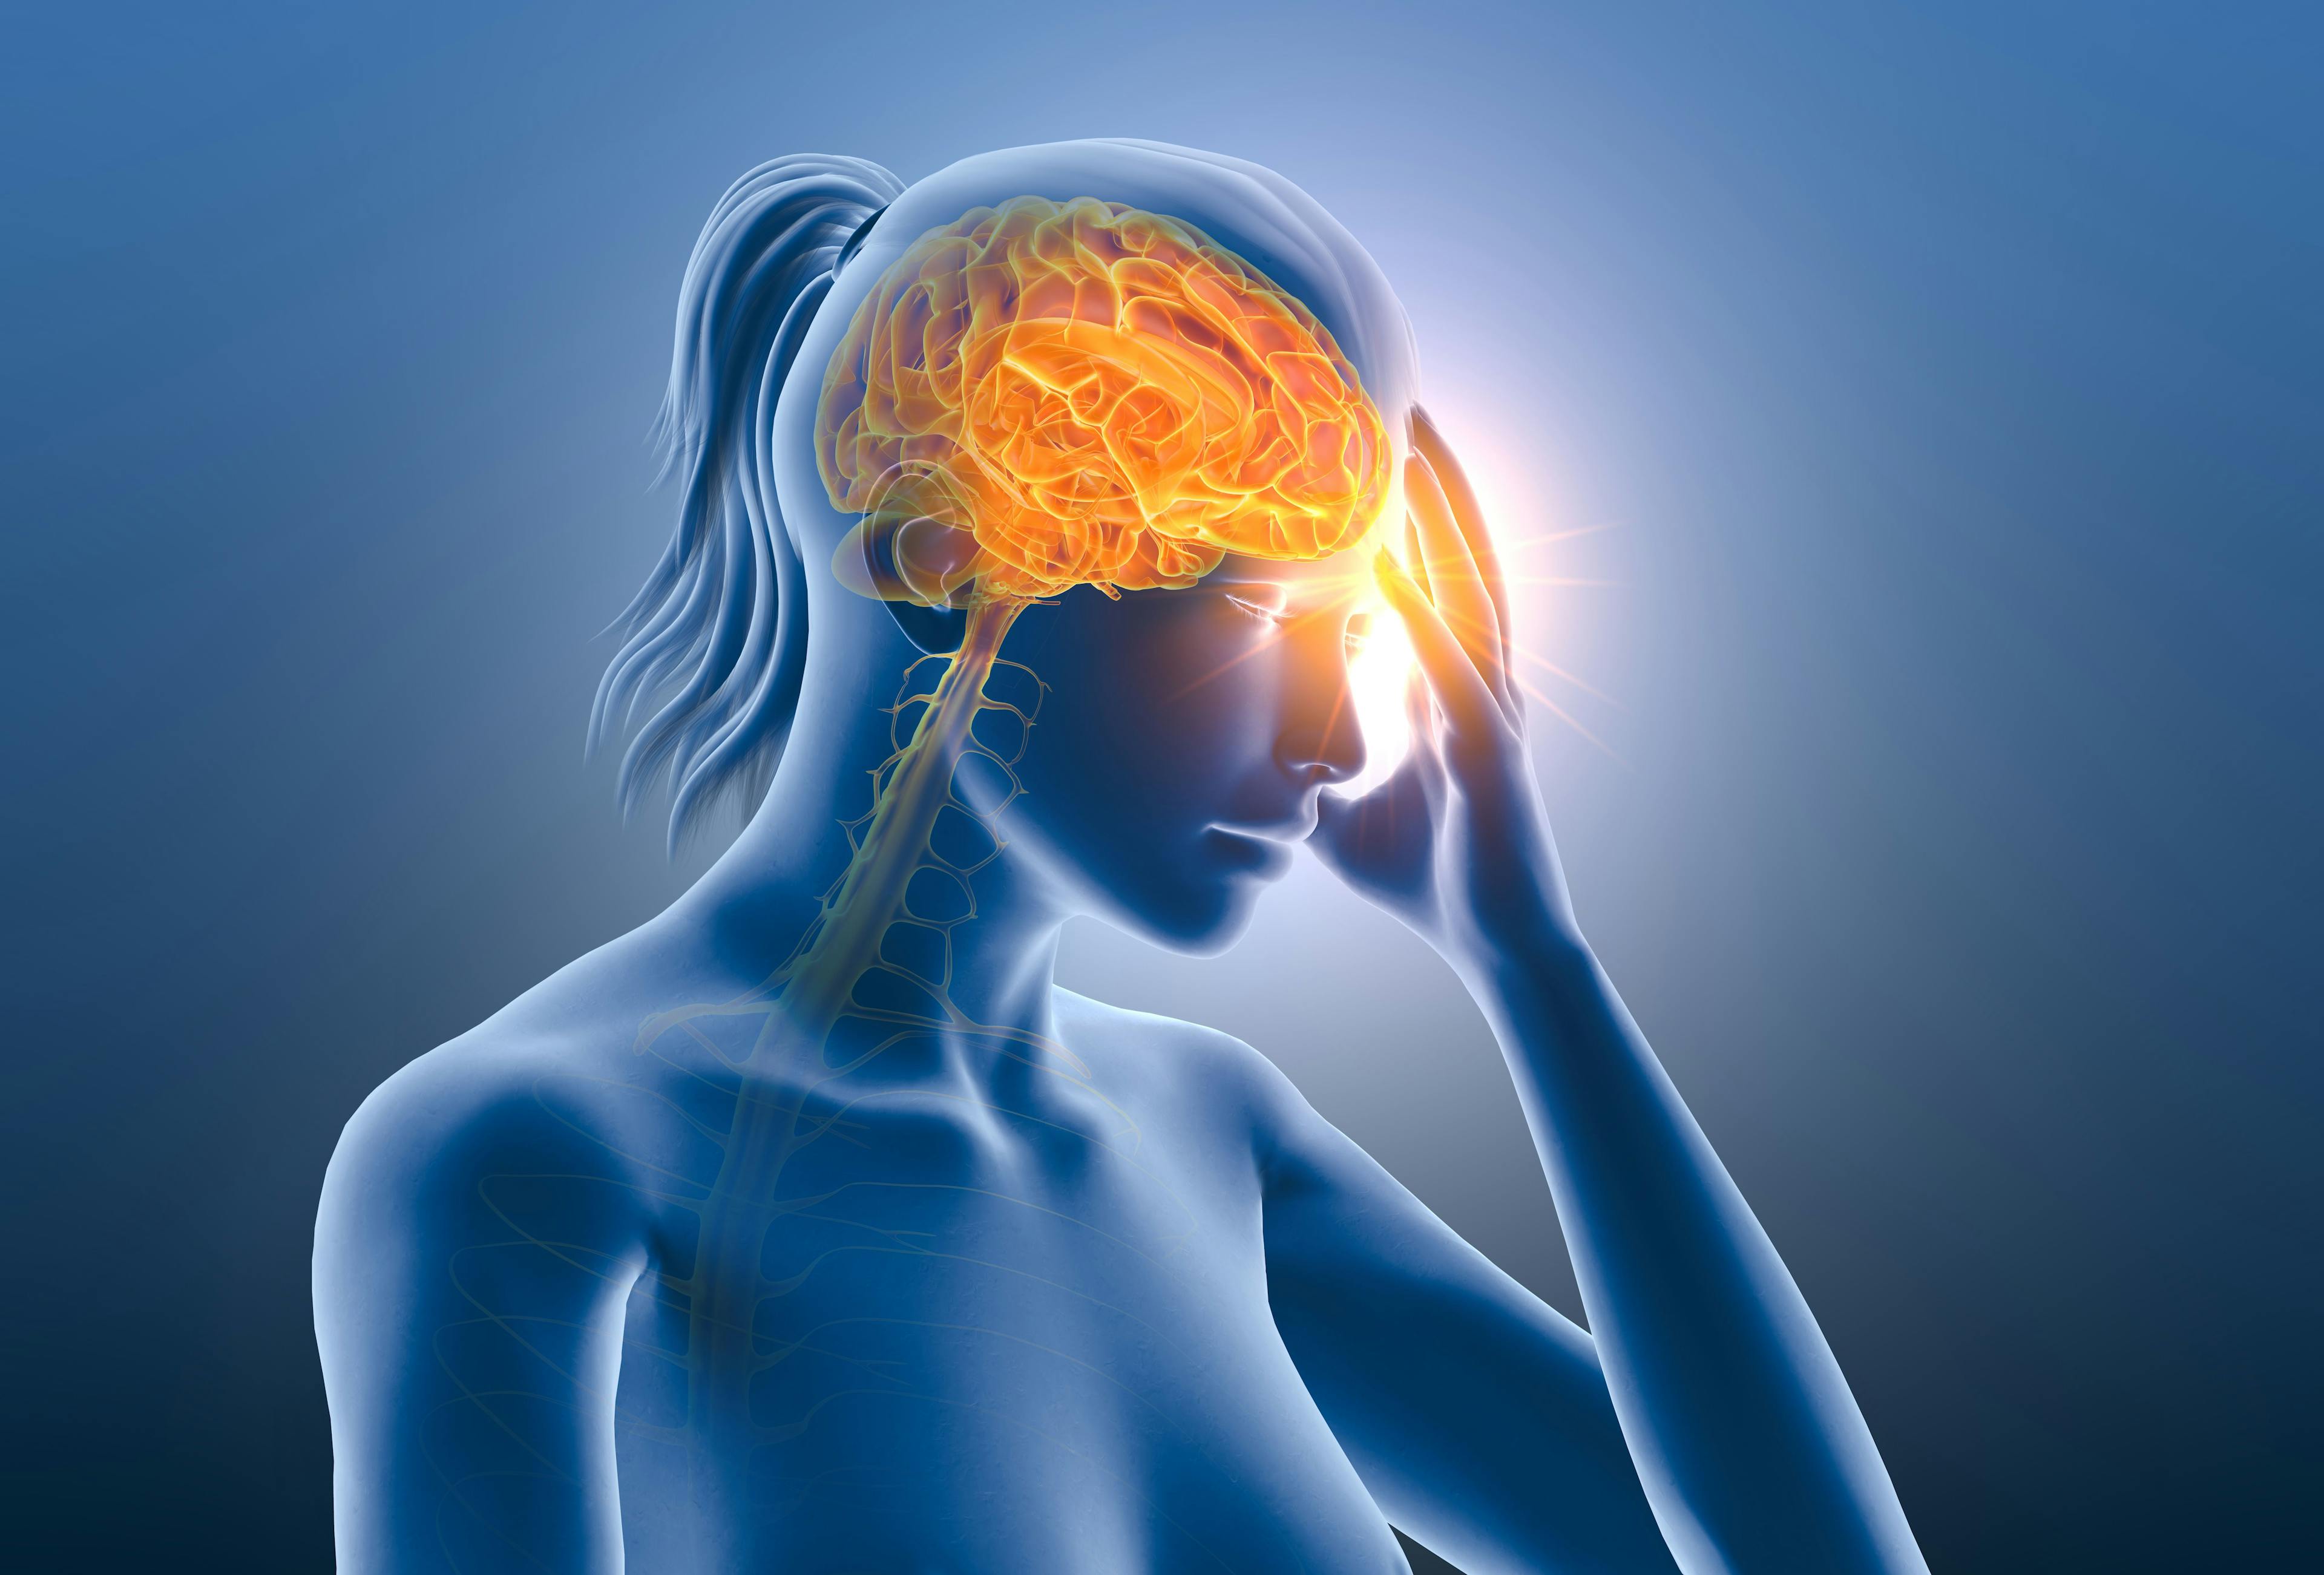 Phase 3 Data Published for Zavegepant for the Acute Treatment of Migraine in Adults 